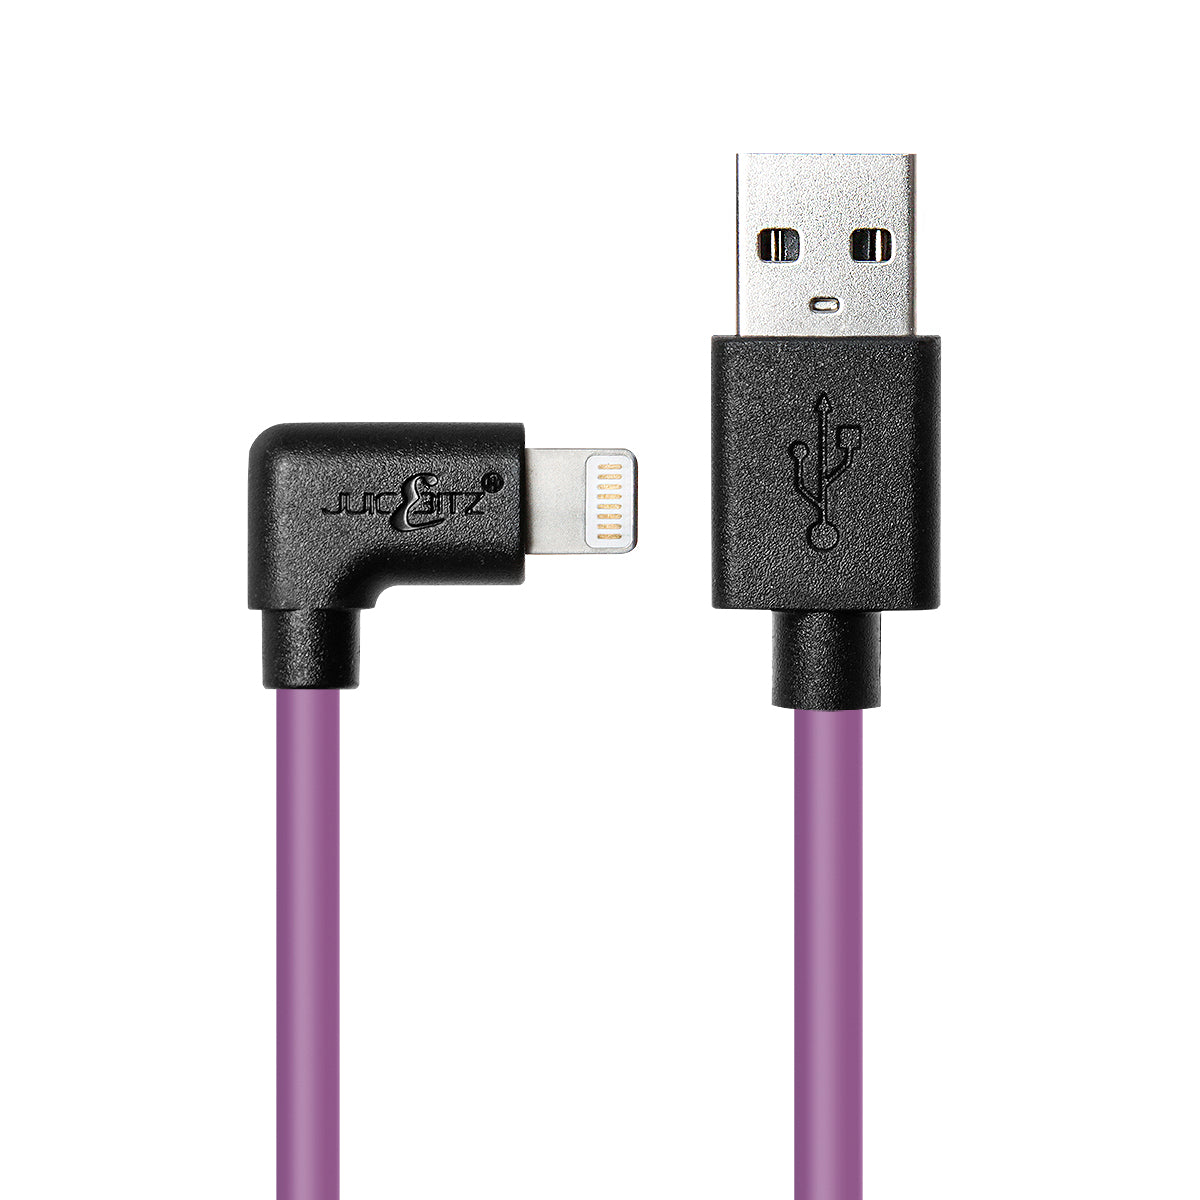 Heavy Duty Angled USB Charger Cable Data Sync Lead for iPhone, iPad, iPod - Purple